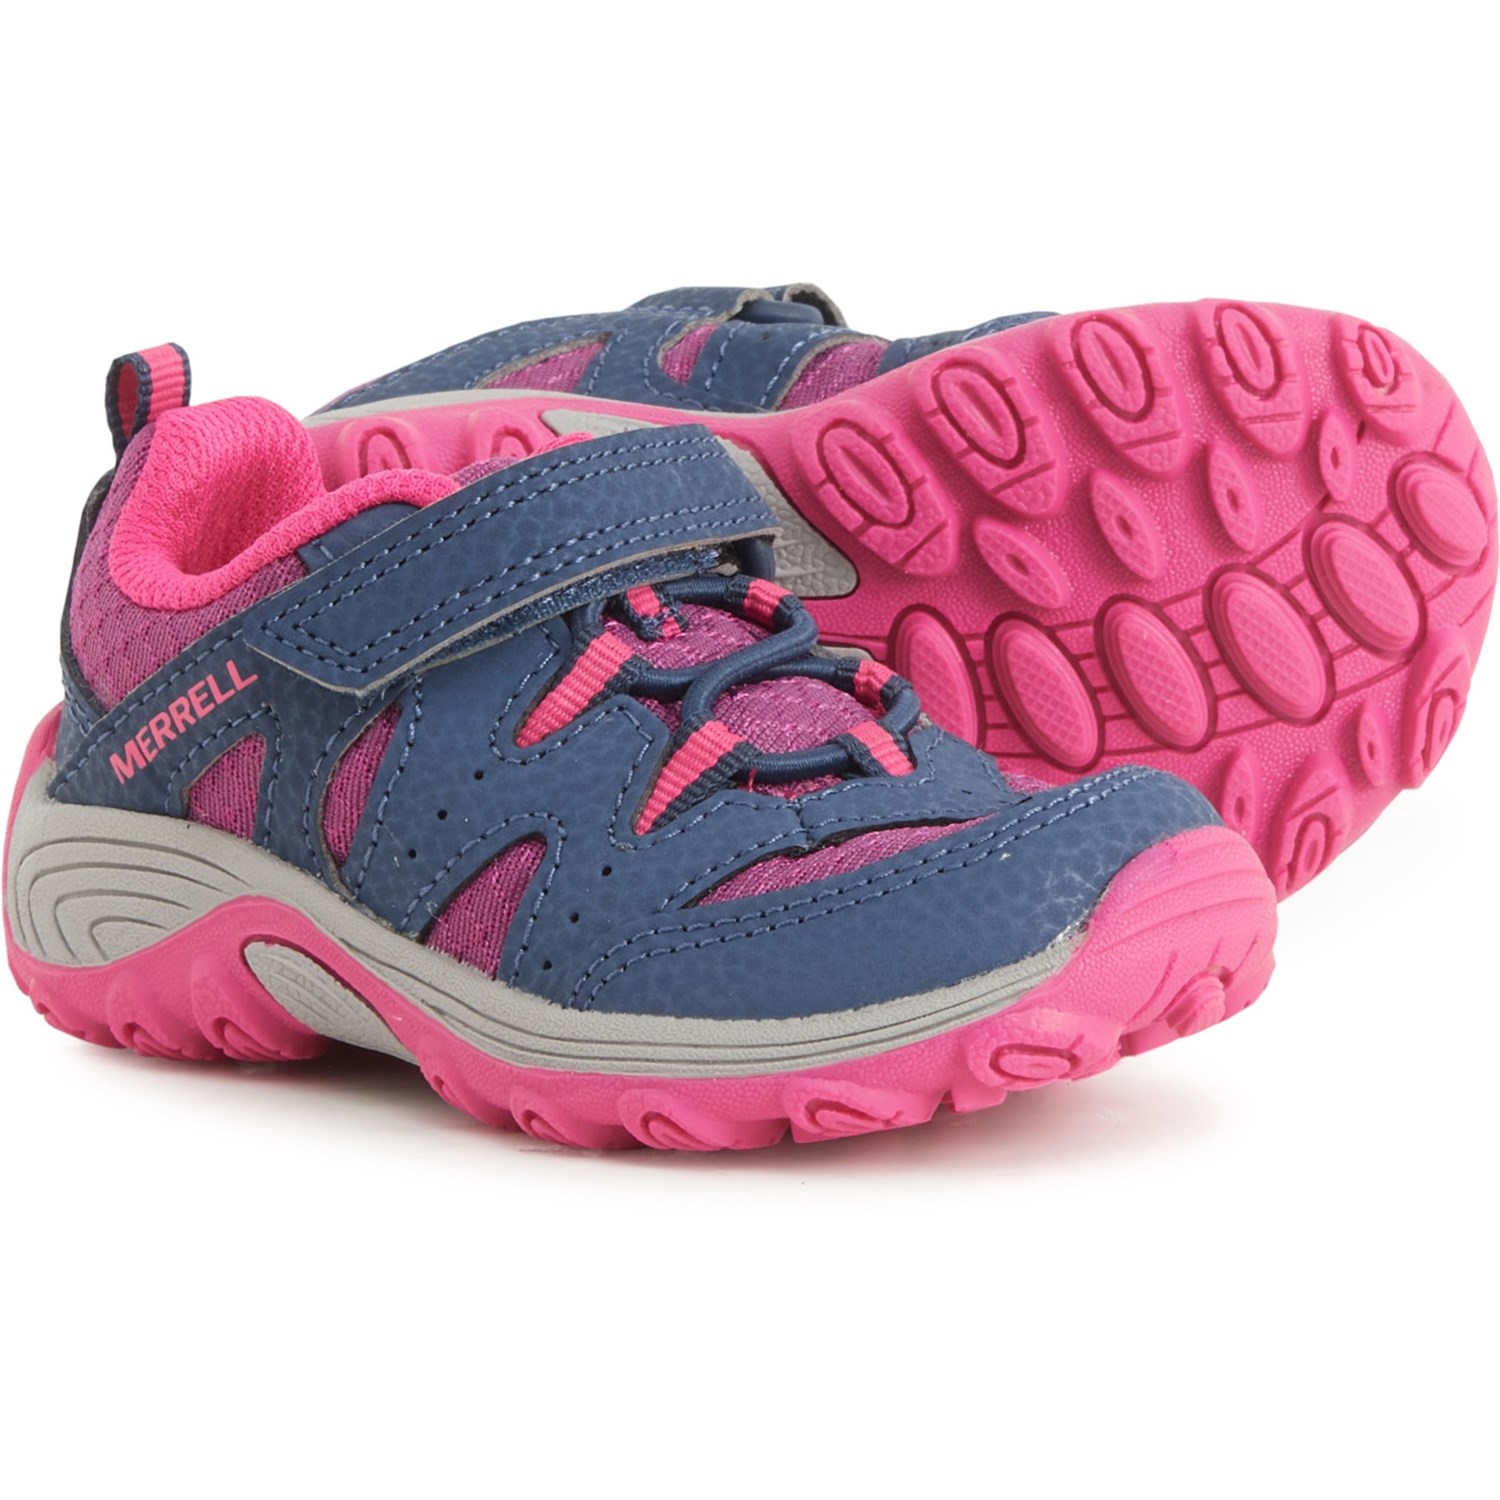 Merrell Toddler Girls Outback Low 2 Hiking Shoes - Leather